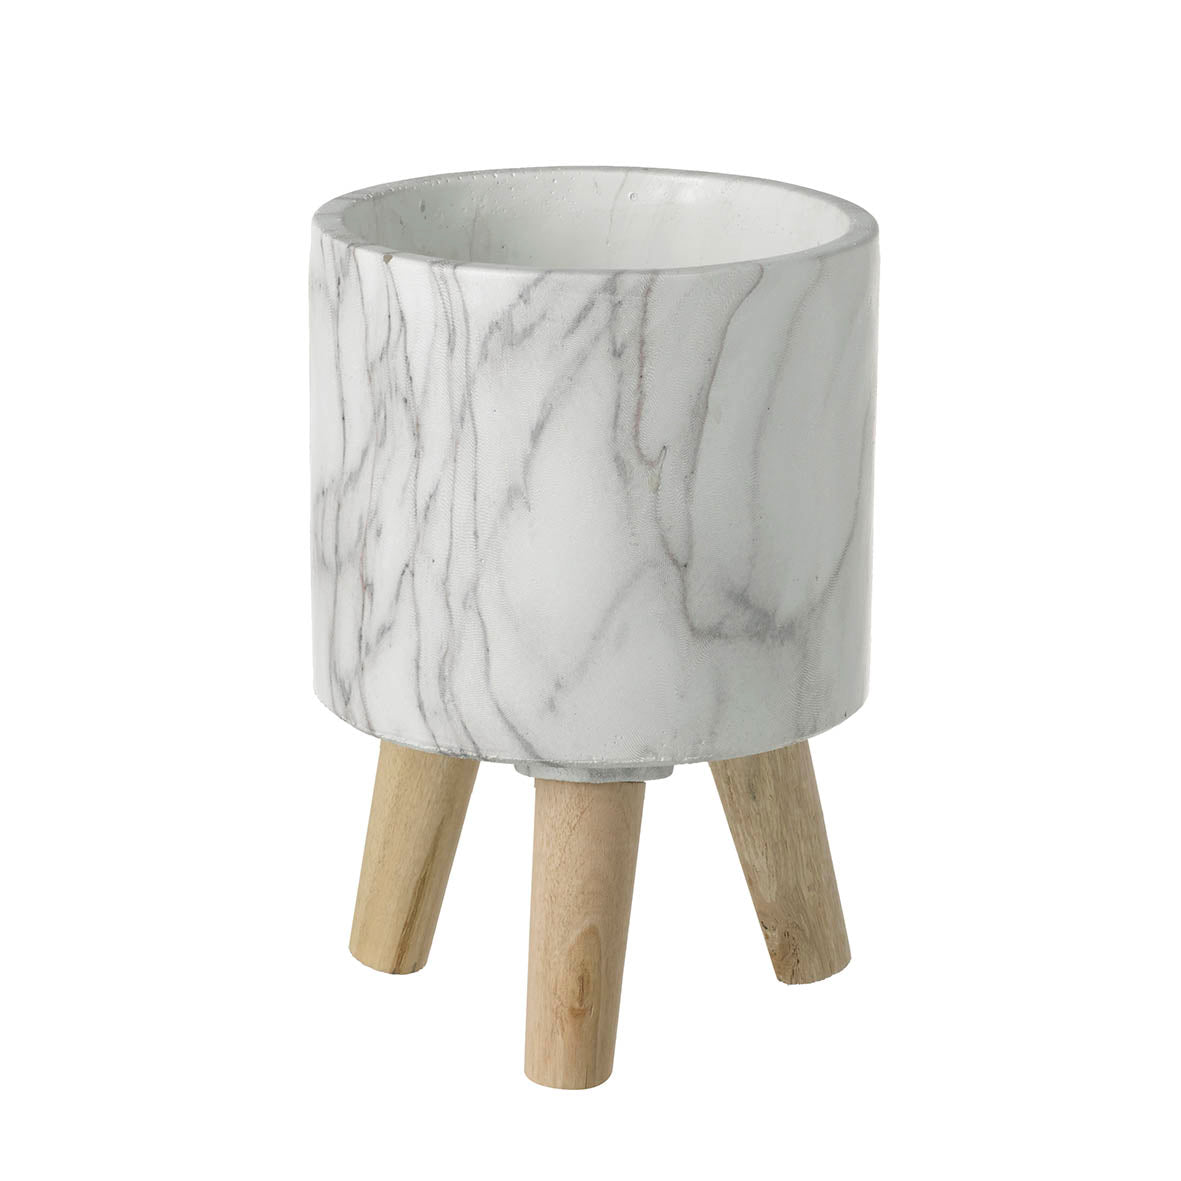 Parlane Living Marble Effect Planter White